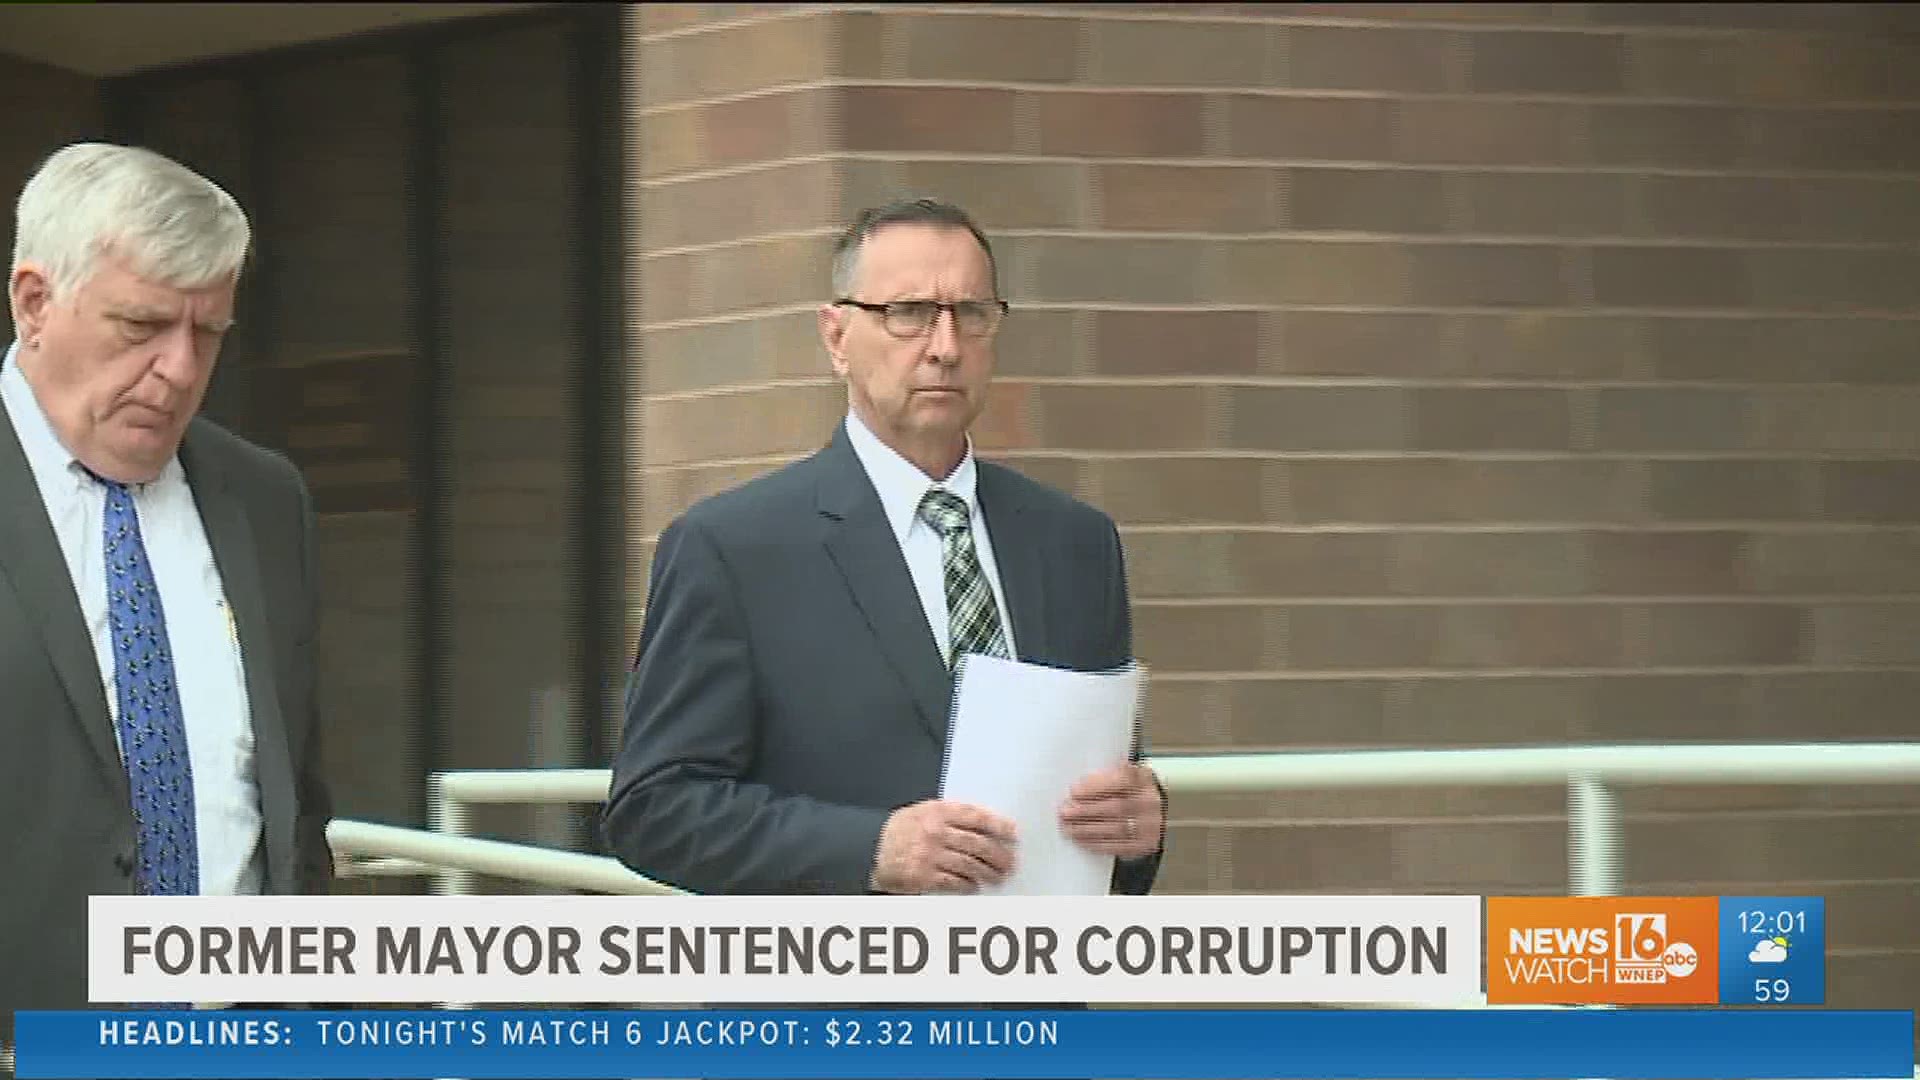 Former Scranton Mayor Bill Courtright learned his punishment Friday morning for running what investigators call a pay-to-play scheme with city vendors.